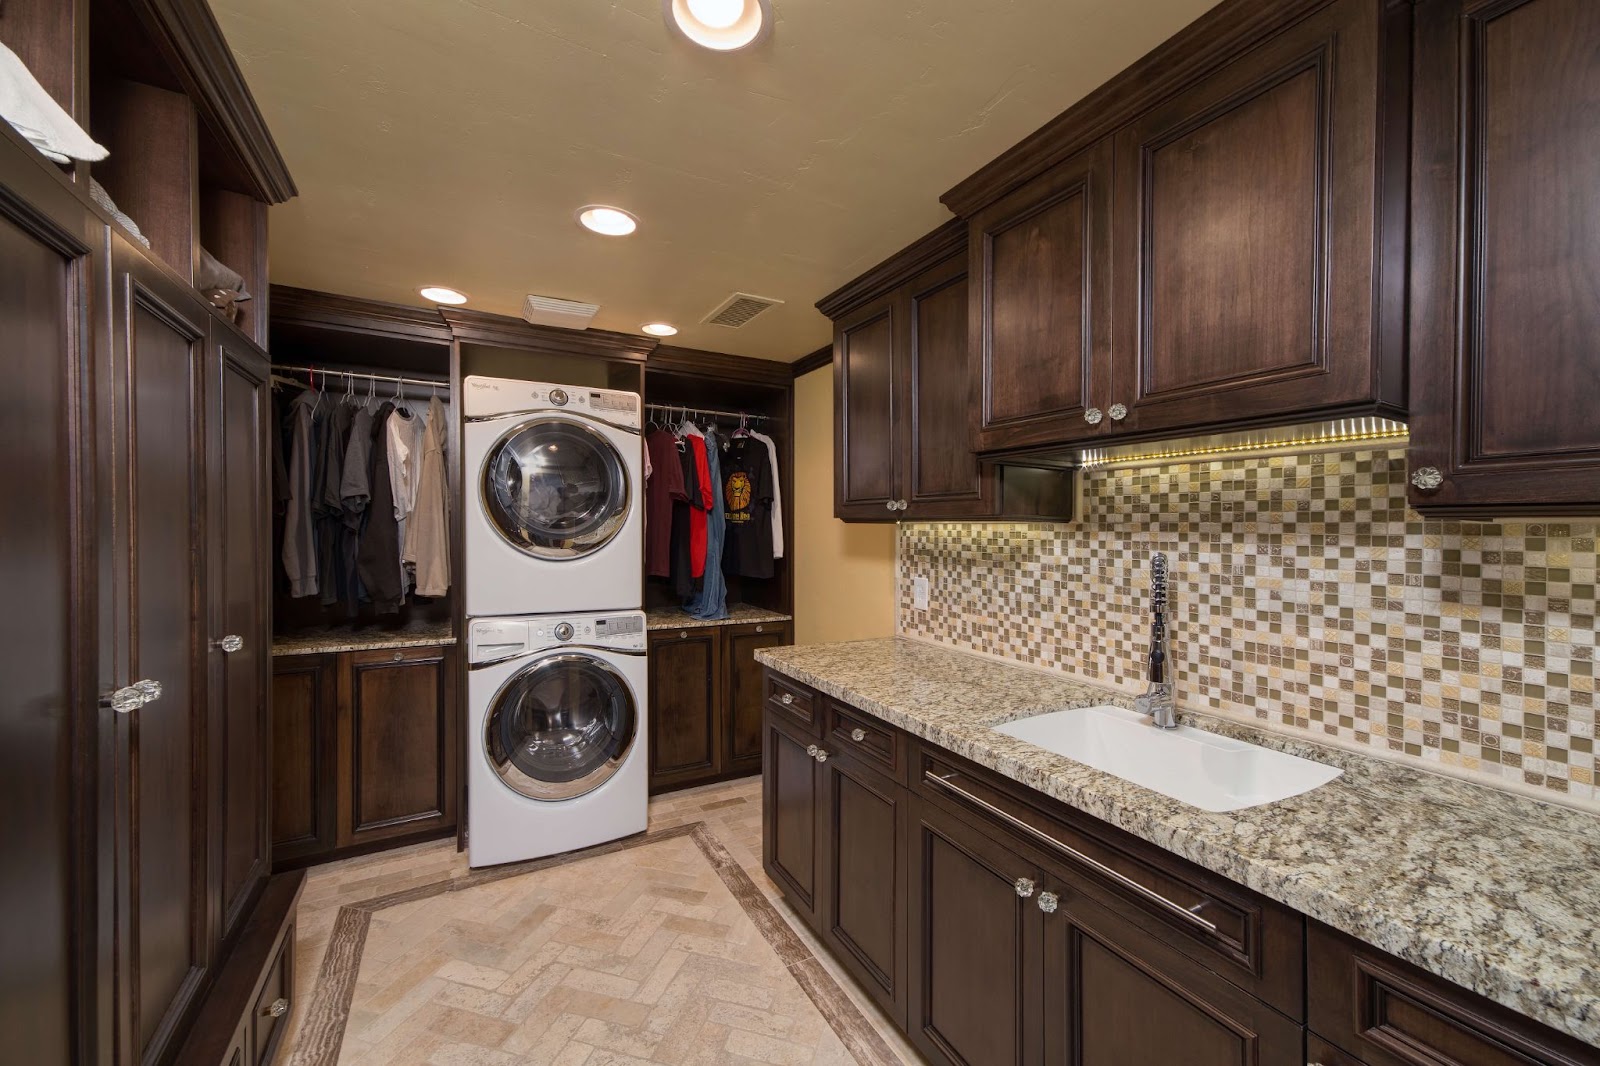 A functional laundry room with stackable washer dryer, countertops and tile backsplash.